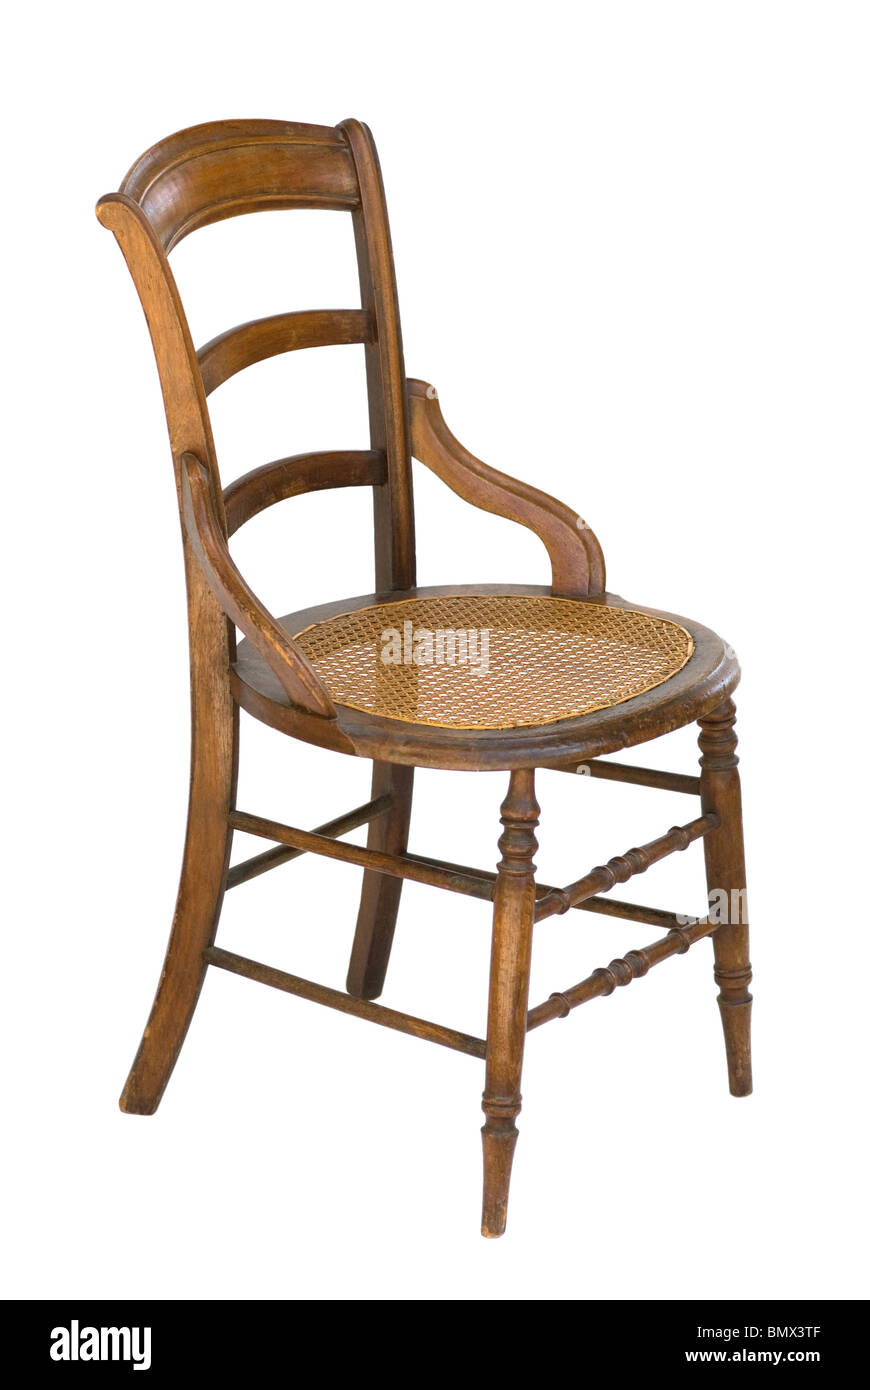 Vintage wood chair with modified arms, ladder-back and cane seat. This is a decorator side chair suitable for bedroom, office, hall. Stock Photo